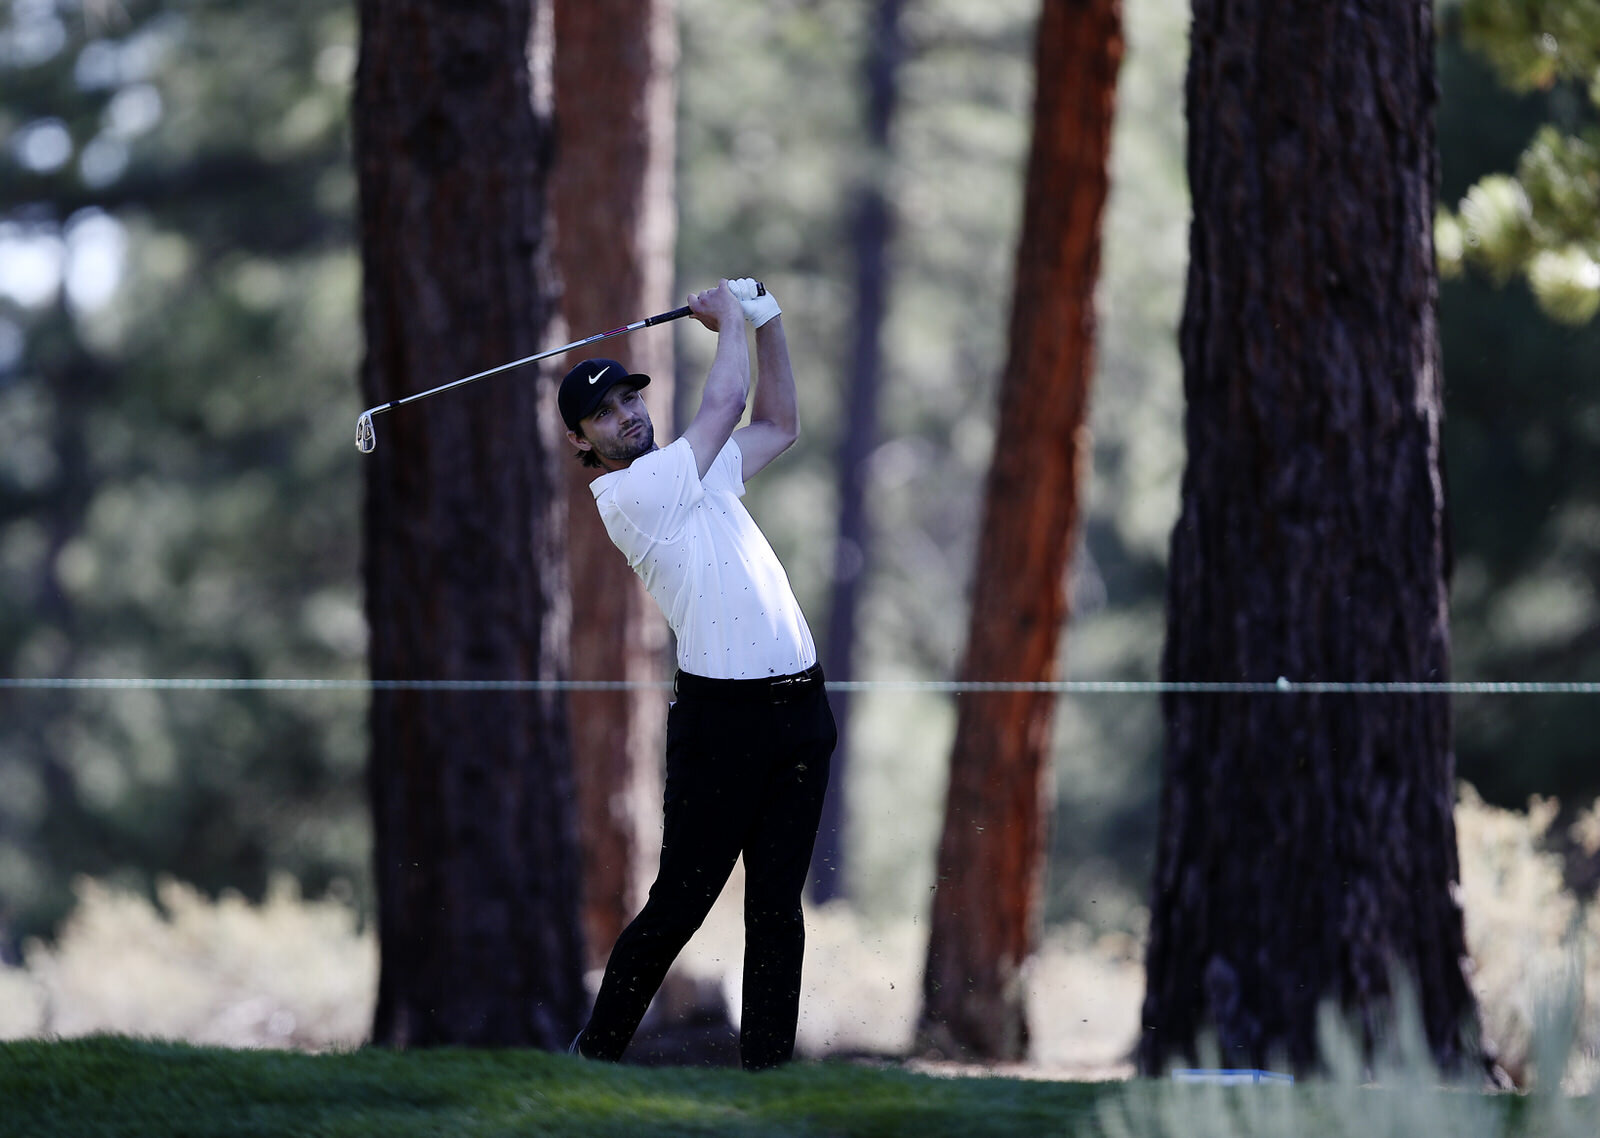  TRUCKEE, CALIFORNIA - AUGUST 01: Kyle Stanley plays his shot from the seventh tee during the third round of the Barracuda Championship at Tahoe Mountain Club's Old Greenwood Golf Course on August 01, 2020 in Truckee, California. (Photo by Jed Jacobs